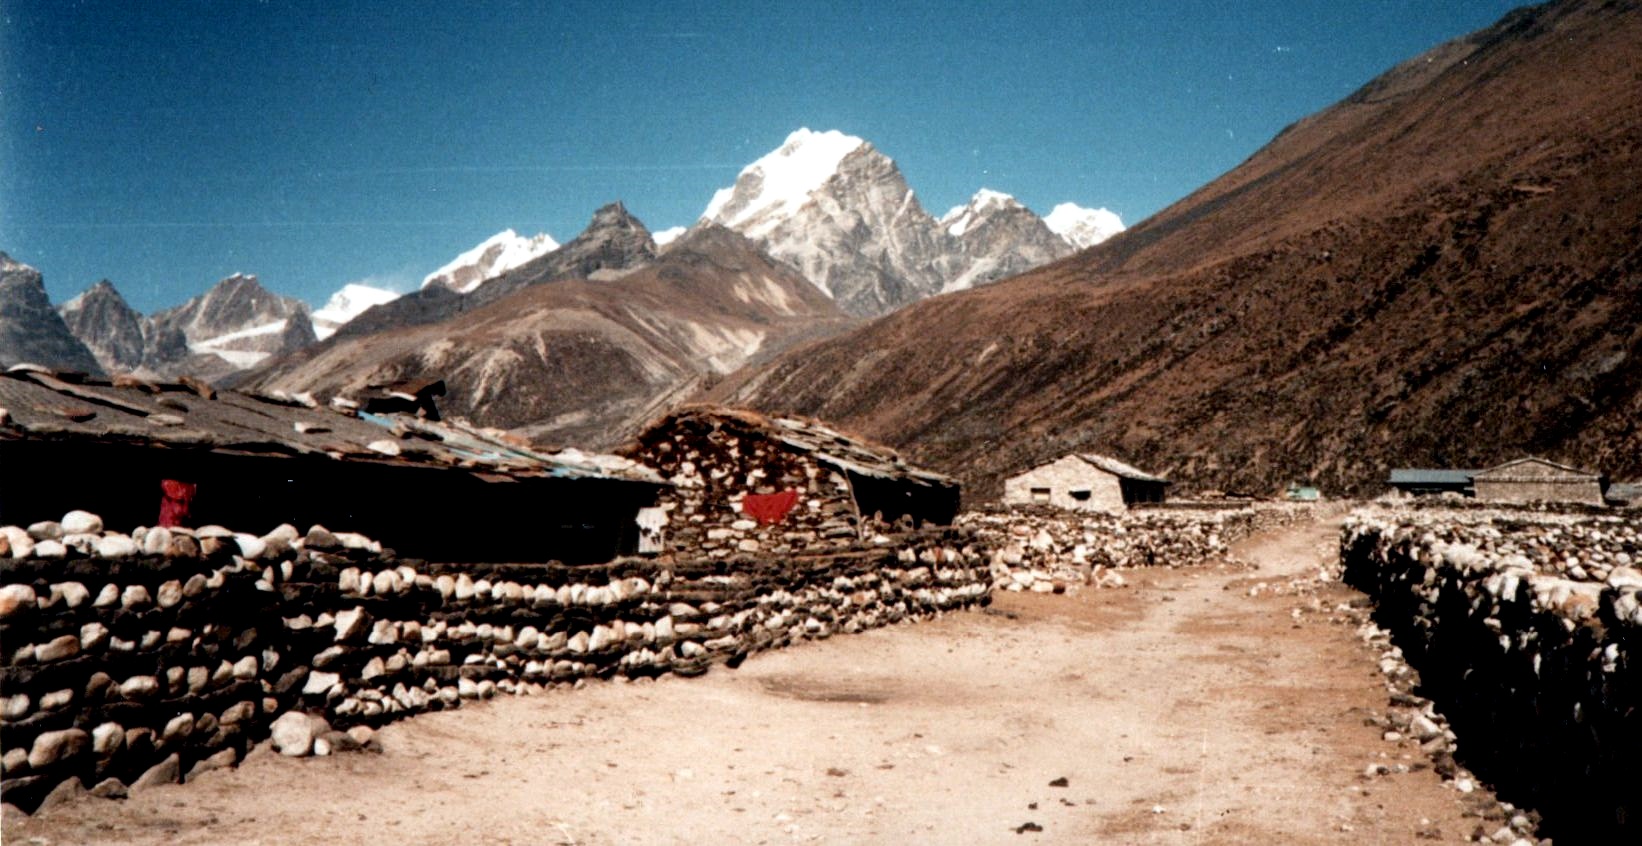 Mount Taboche from Pheriche on route to Everest Base Camp